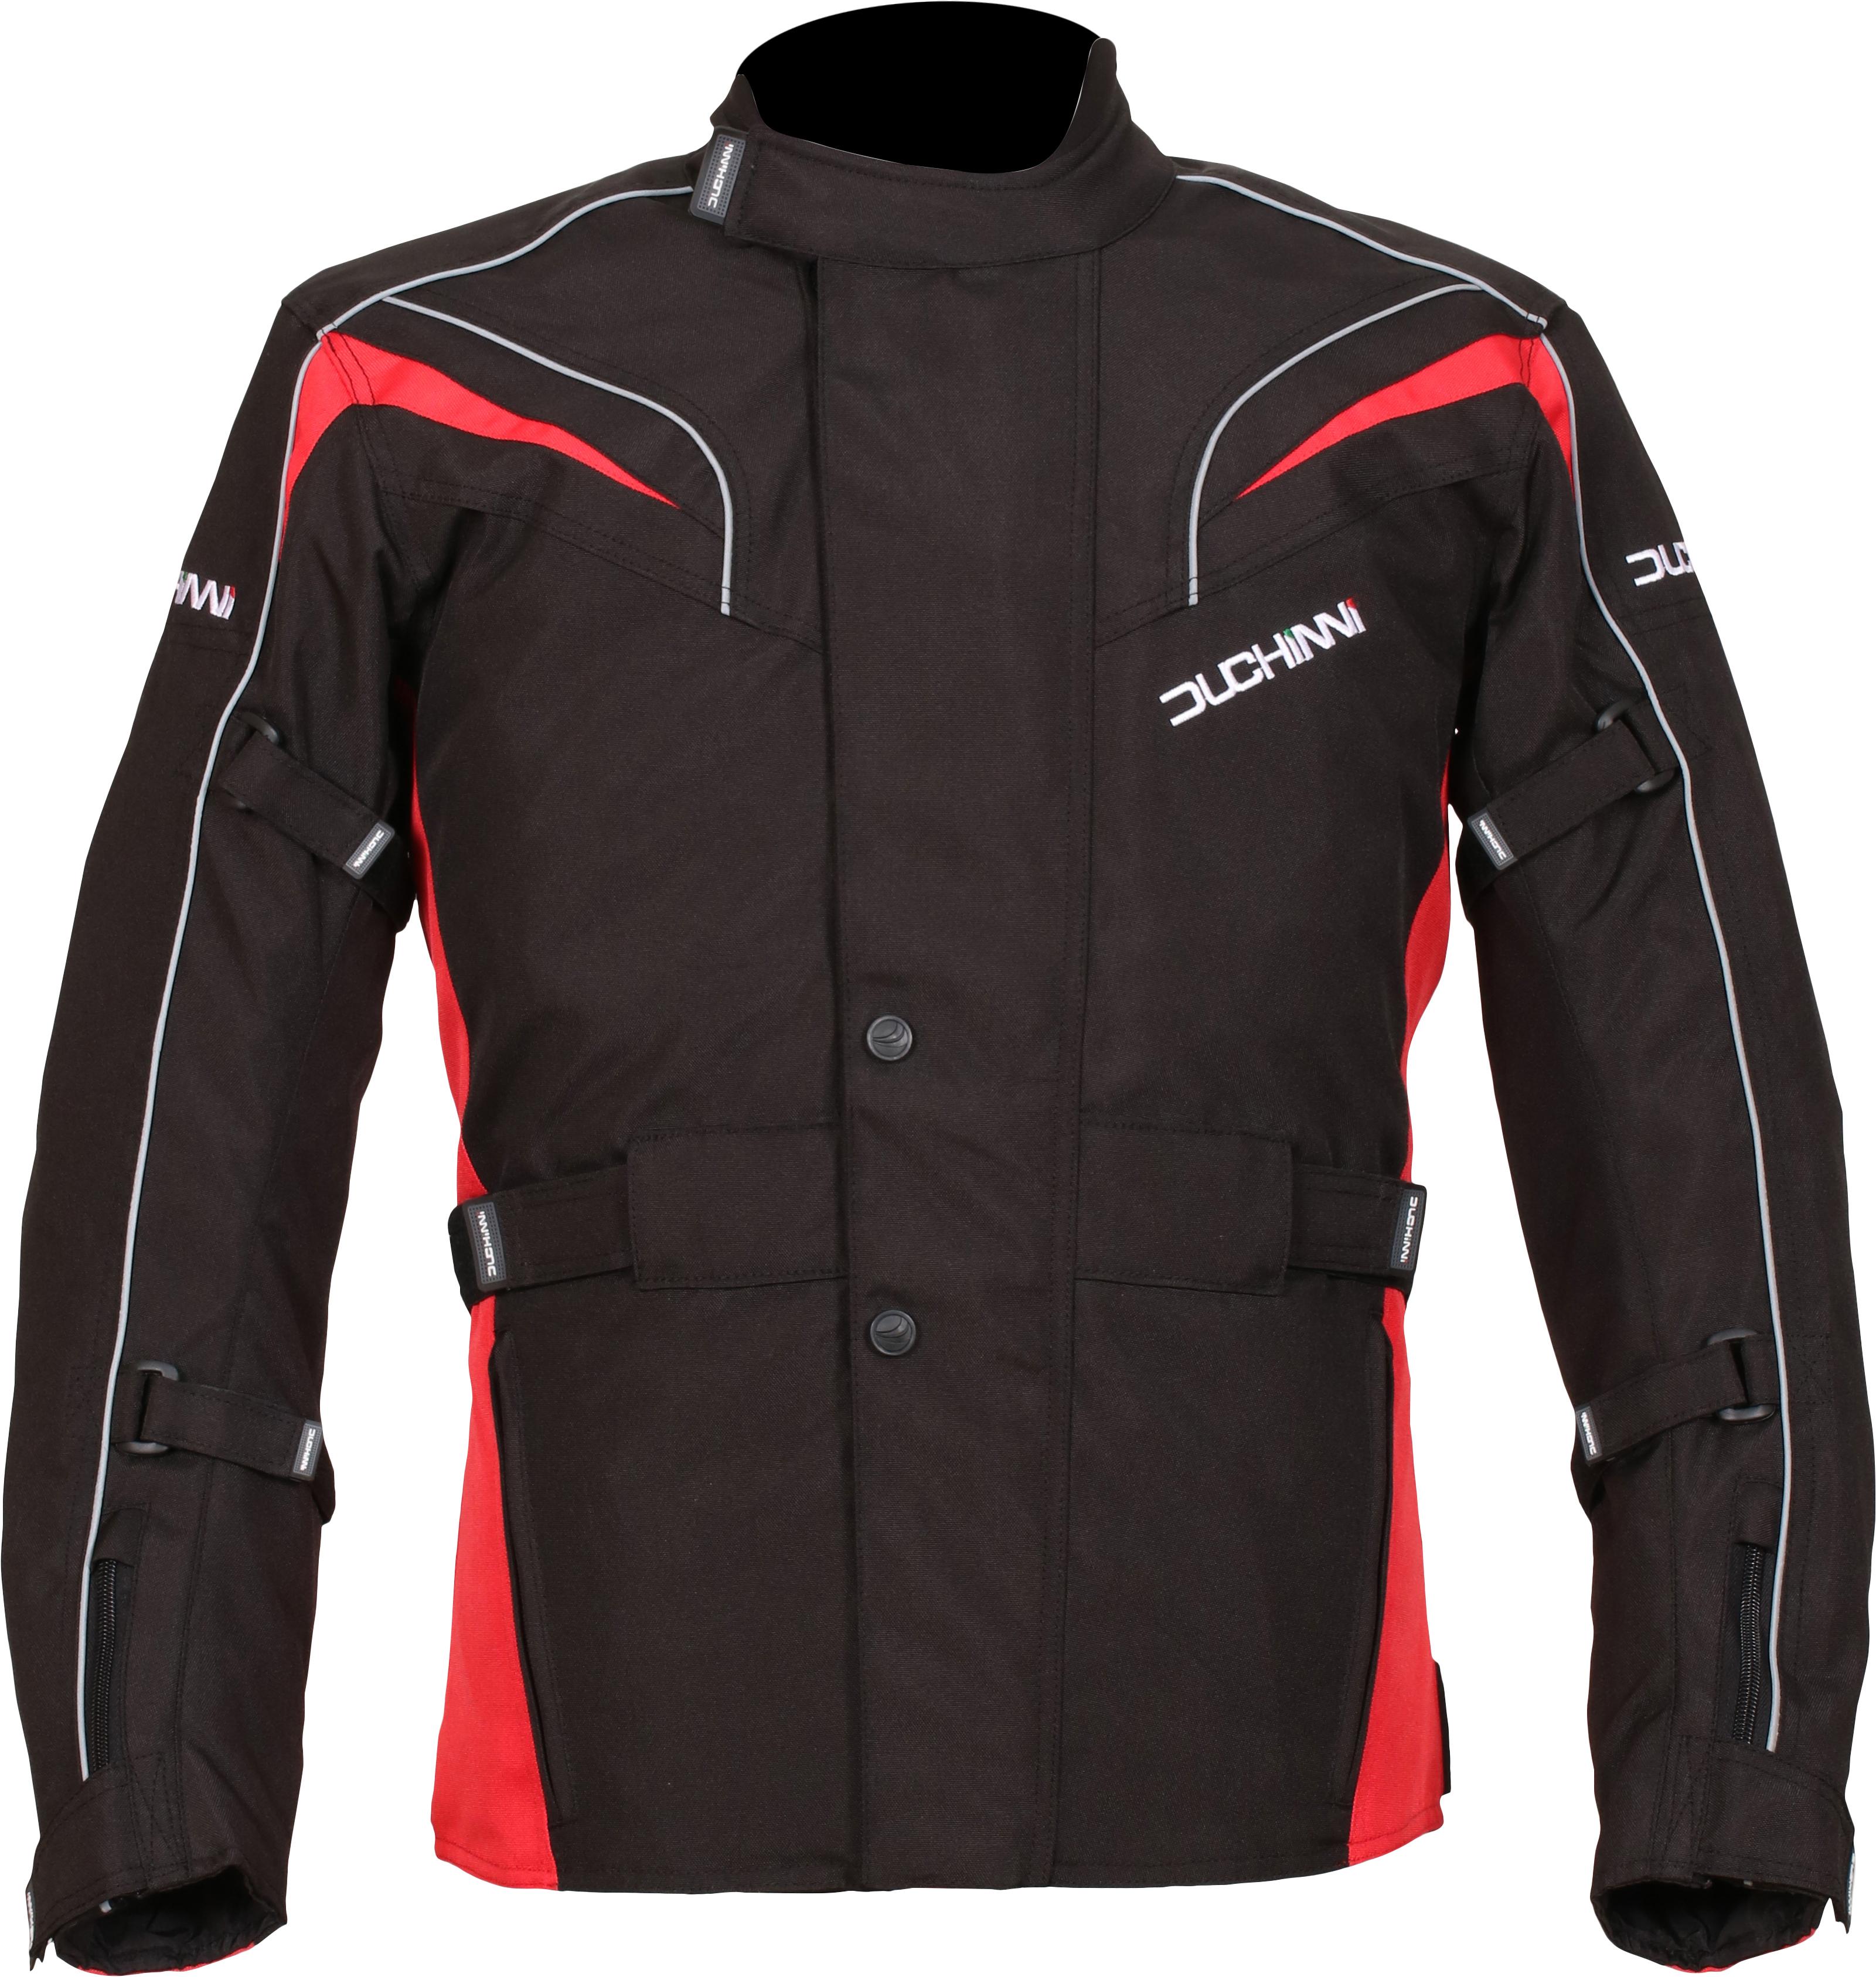 Duchinni Hurrican Motorcycle Jacket - Black And Red, M